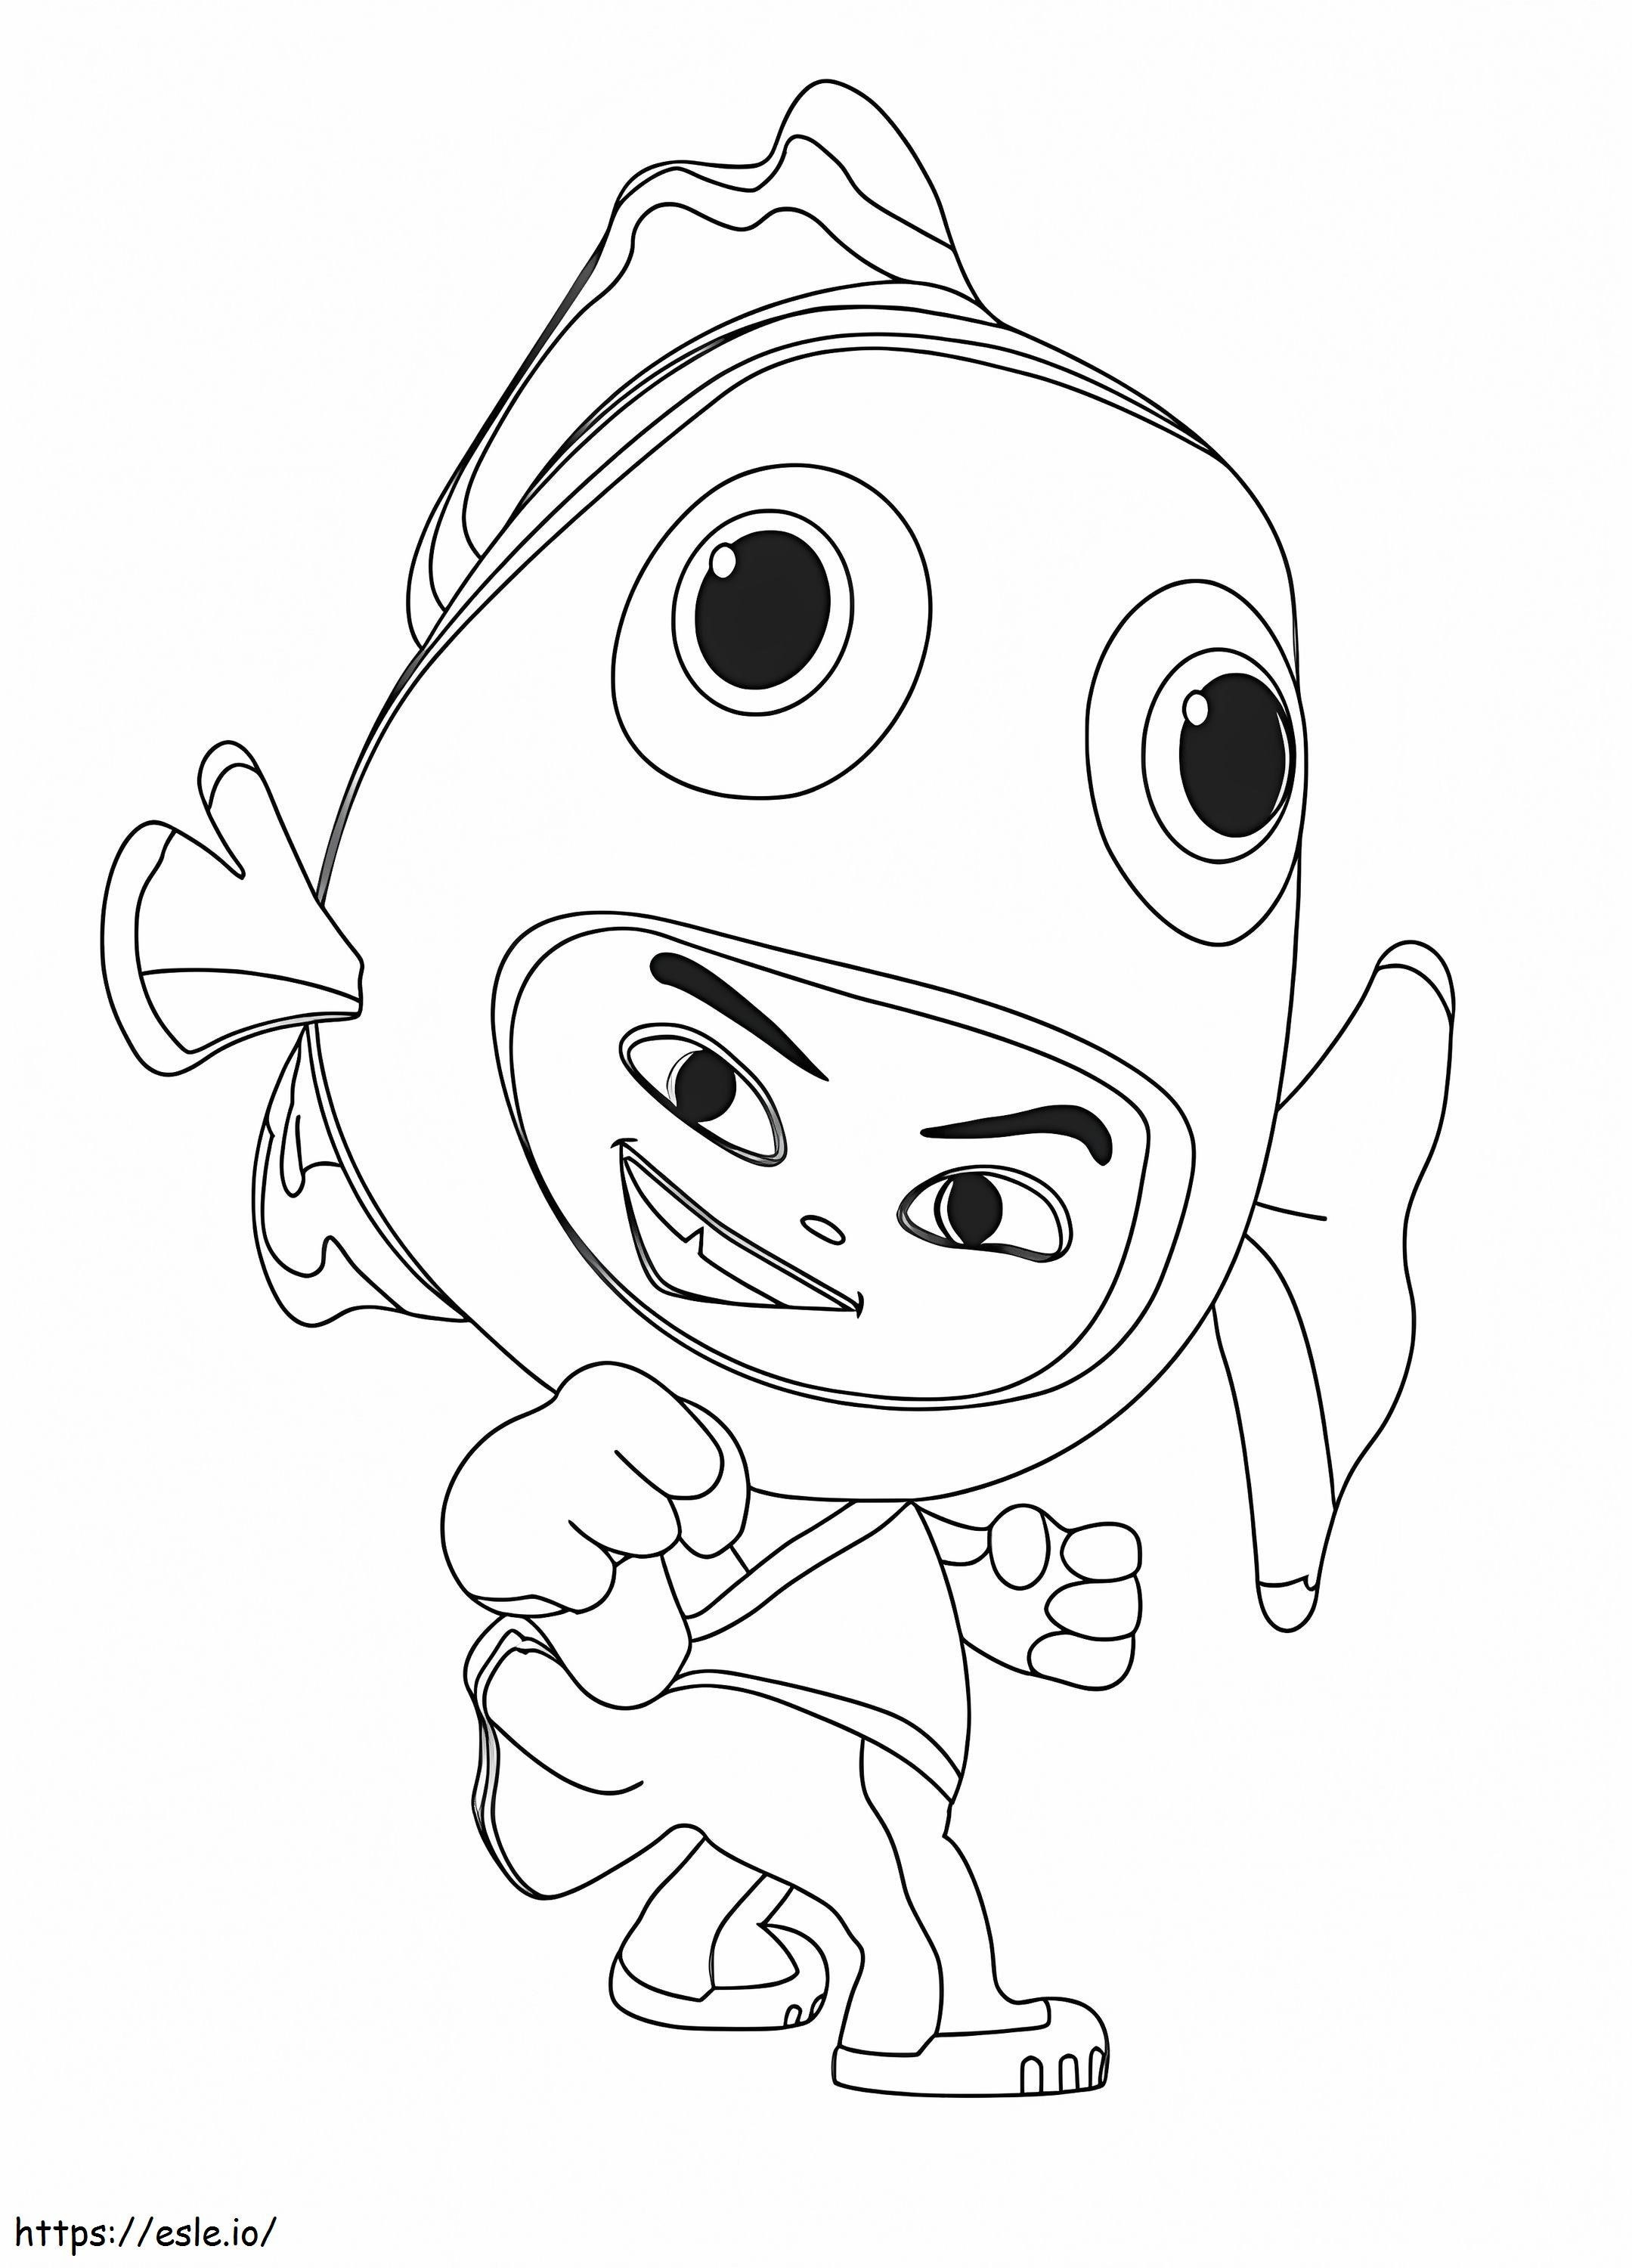 Nemo From Disney Universe coloring page